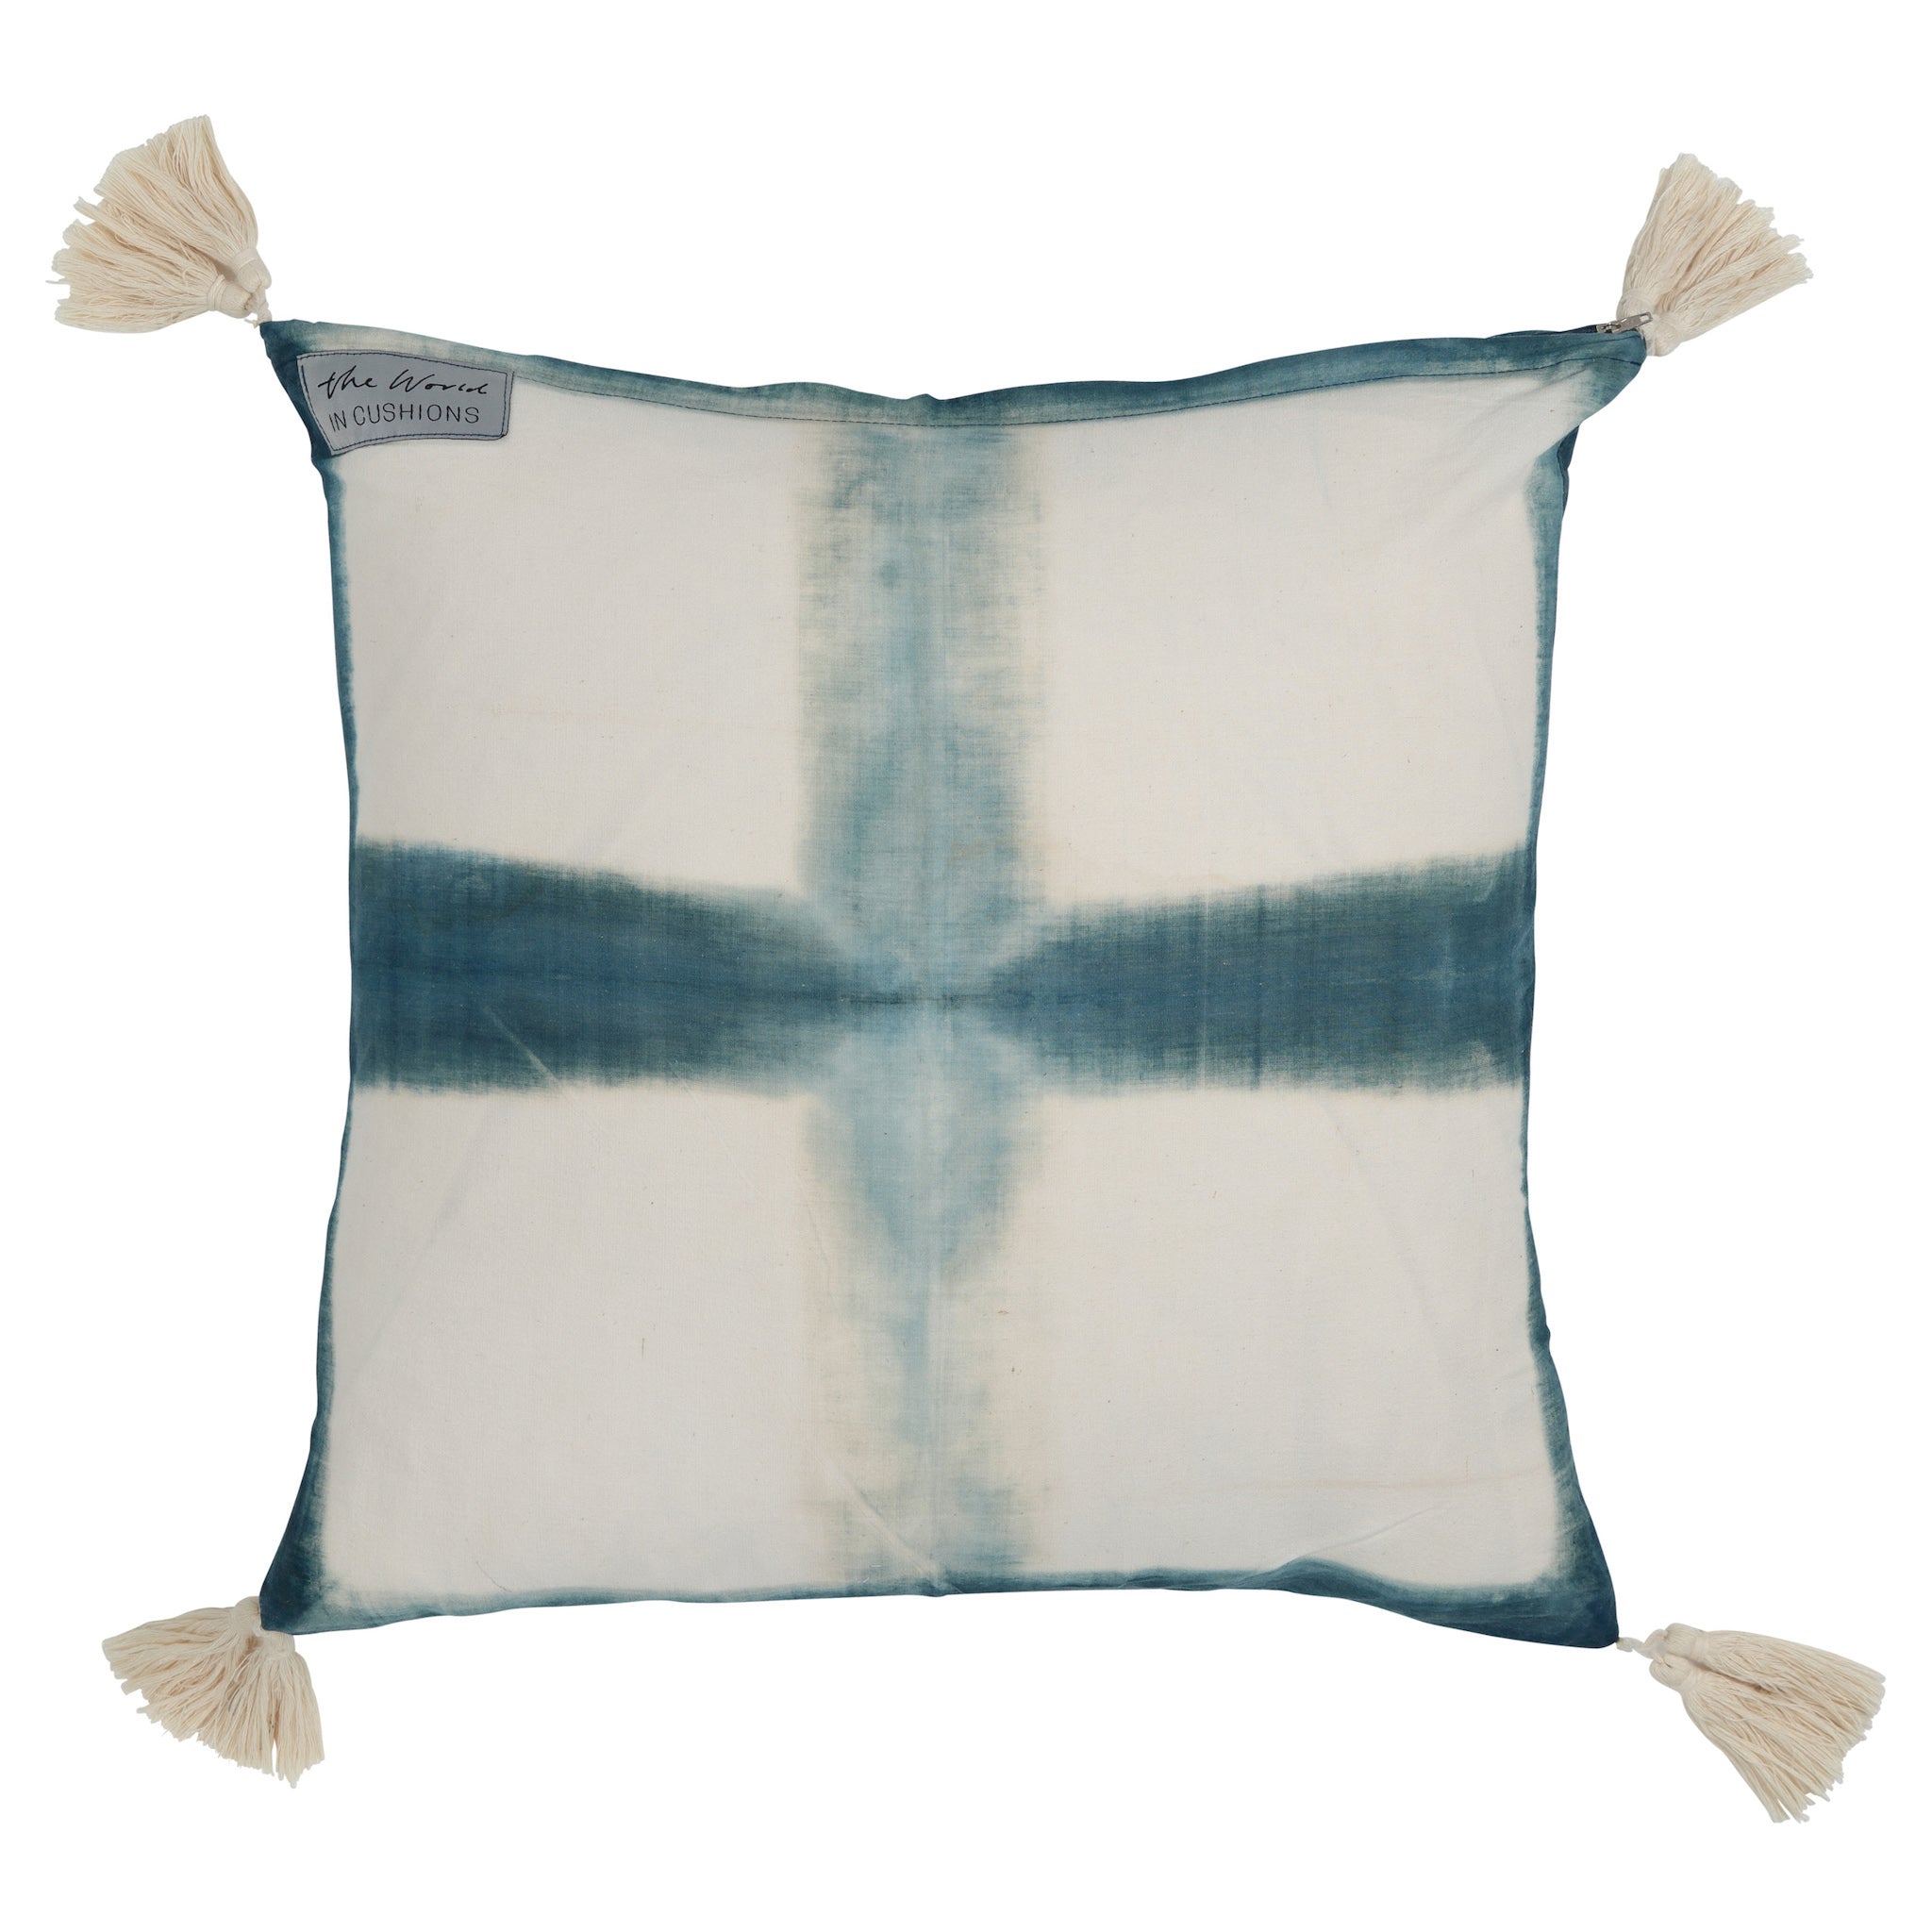 Navy Blue and White Hand Dyed Cross Motif with Tassels Square Scatter Cushion from Bali, Indonesia - BACK